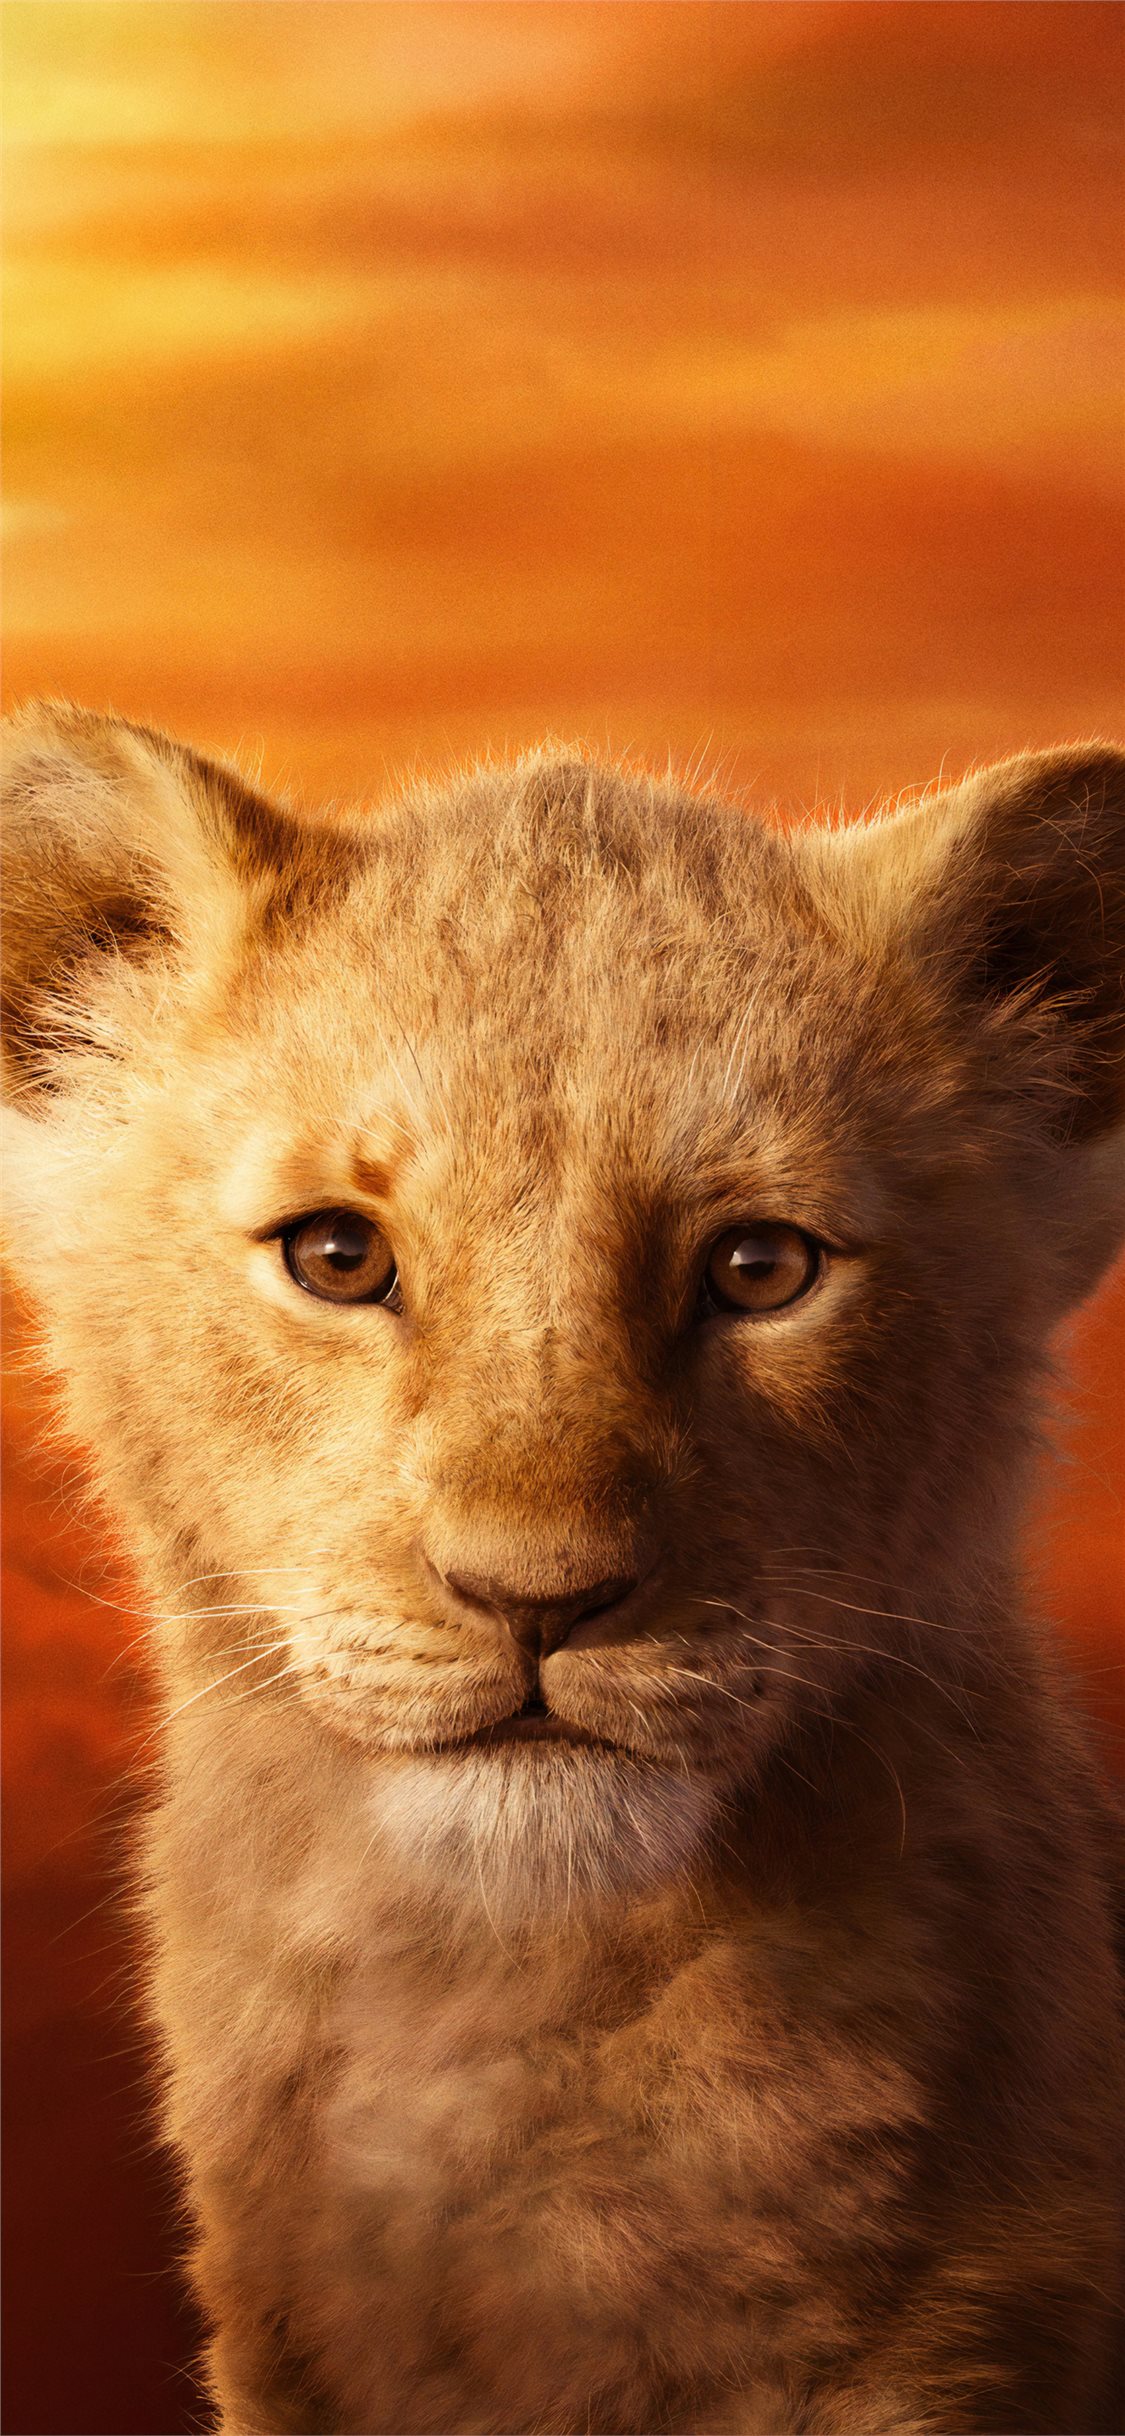 jd mccrary as simba the lion king 2019 4k iPhone X Wallpapers Free Download